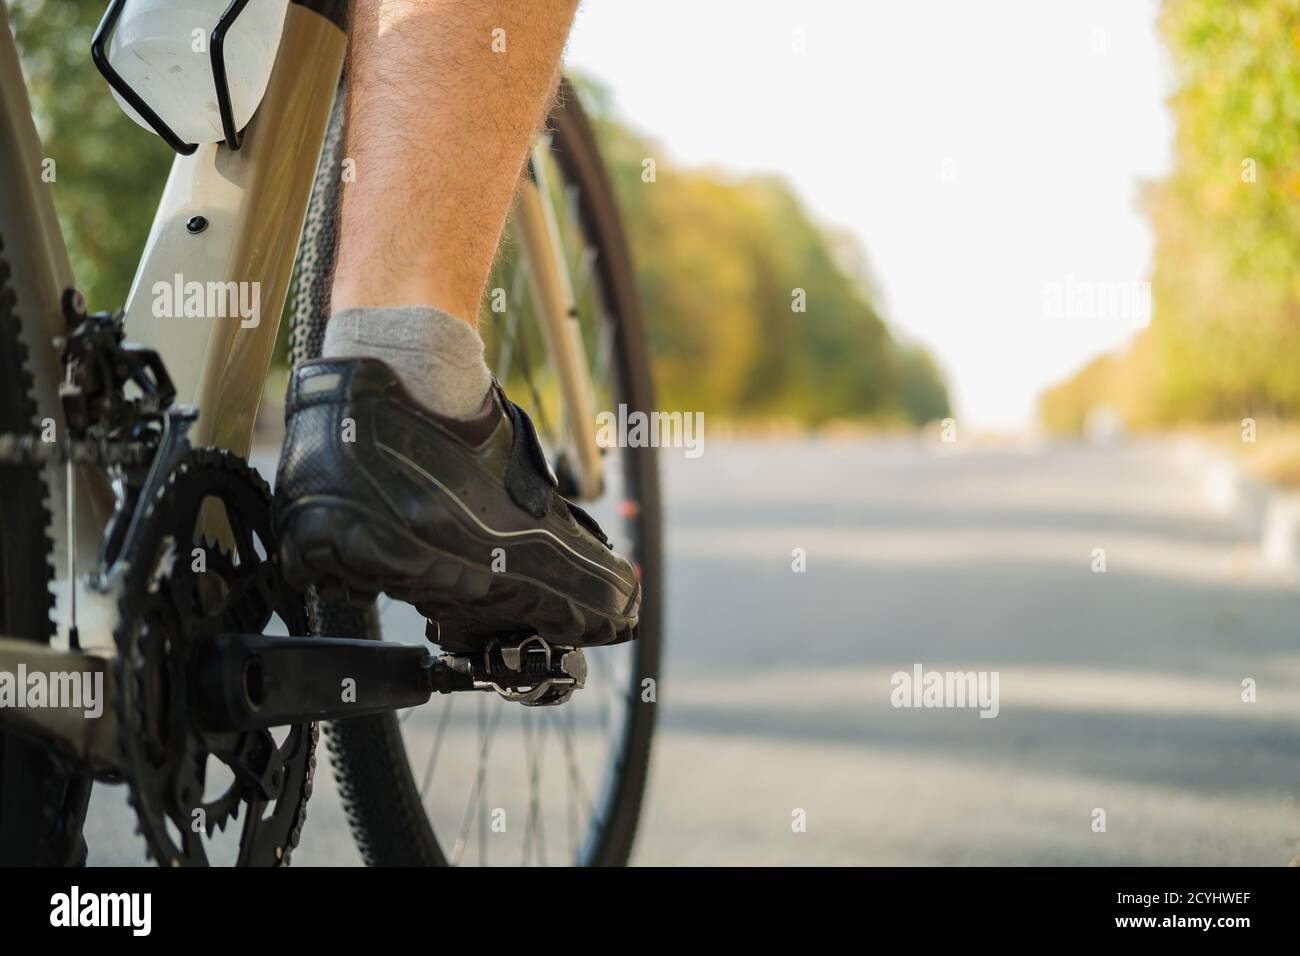 Bicycle shoes with clipless pedals on the crankset, copy space view. Cycling performance, active lifestyle, bike training concept Stock Photo